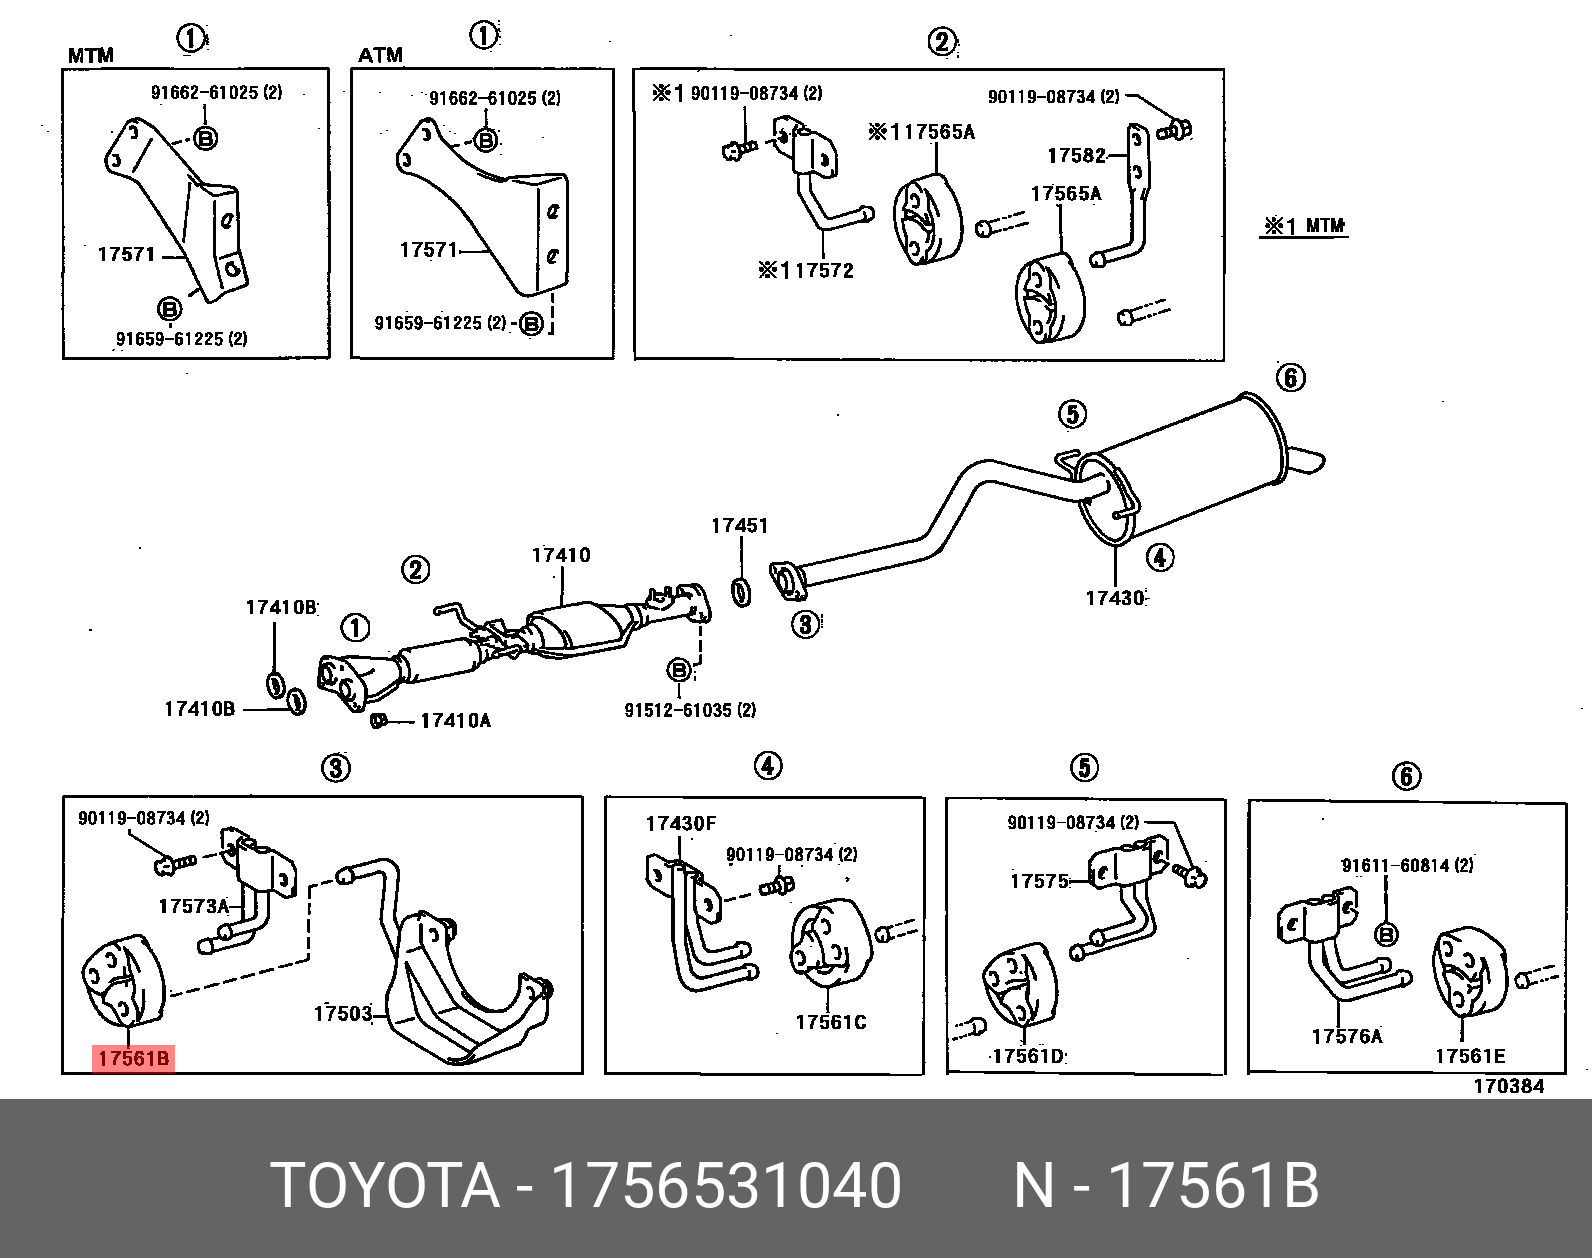 CAMRY 200601 - 201108, SUPPORT, EXHAUST PIPE, NO.3